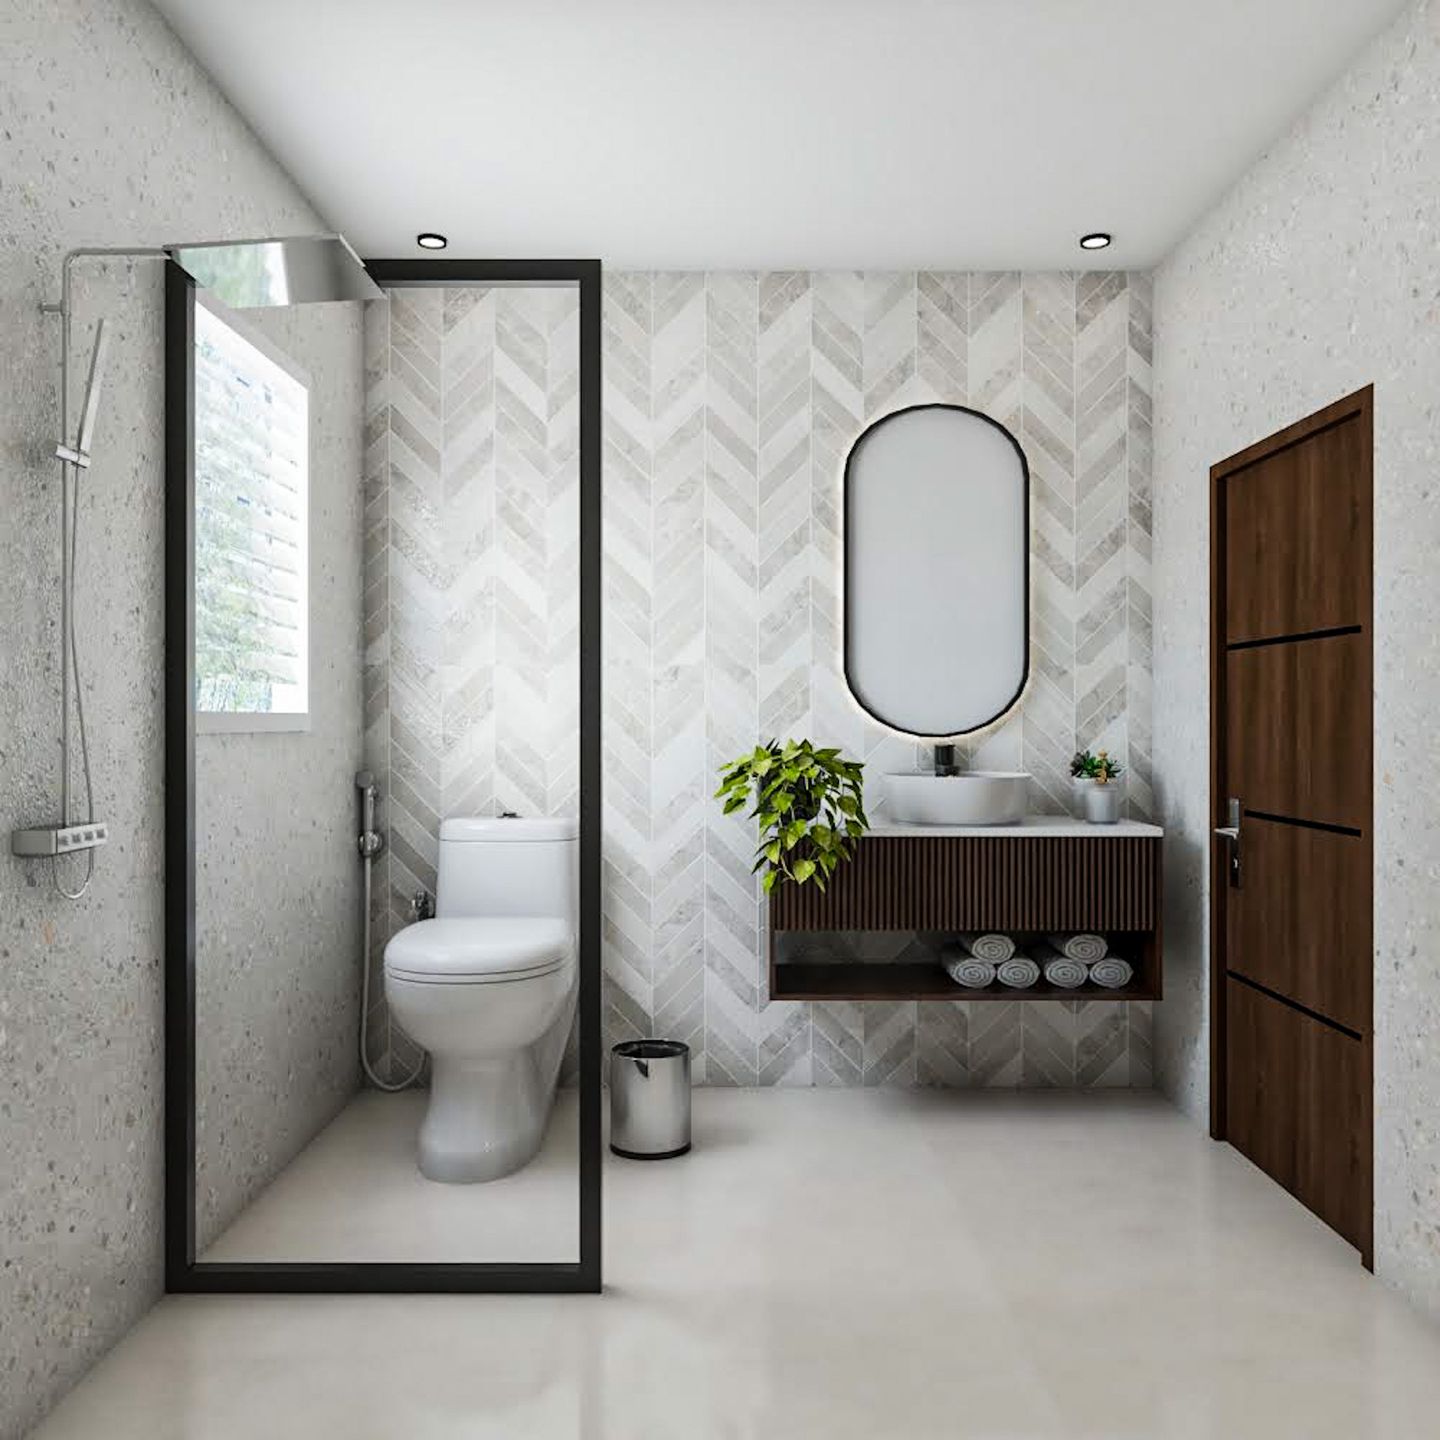 Bathroom Design With White And Grey Herringbone Accent Wall - Livspace